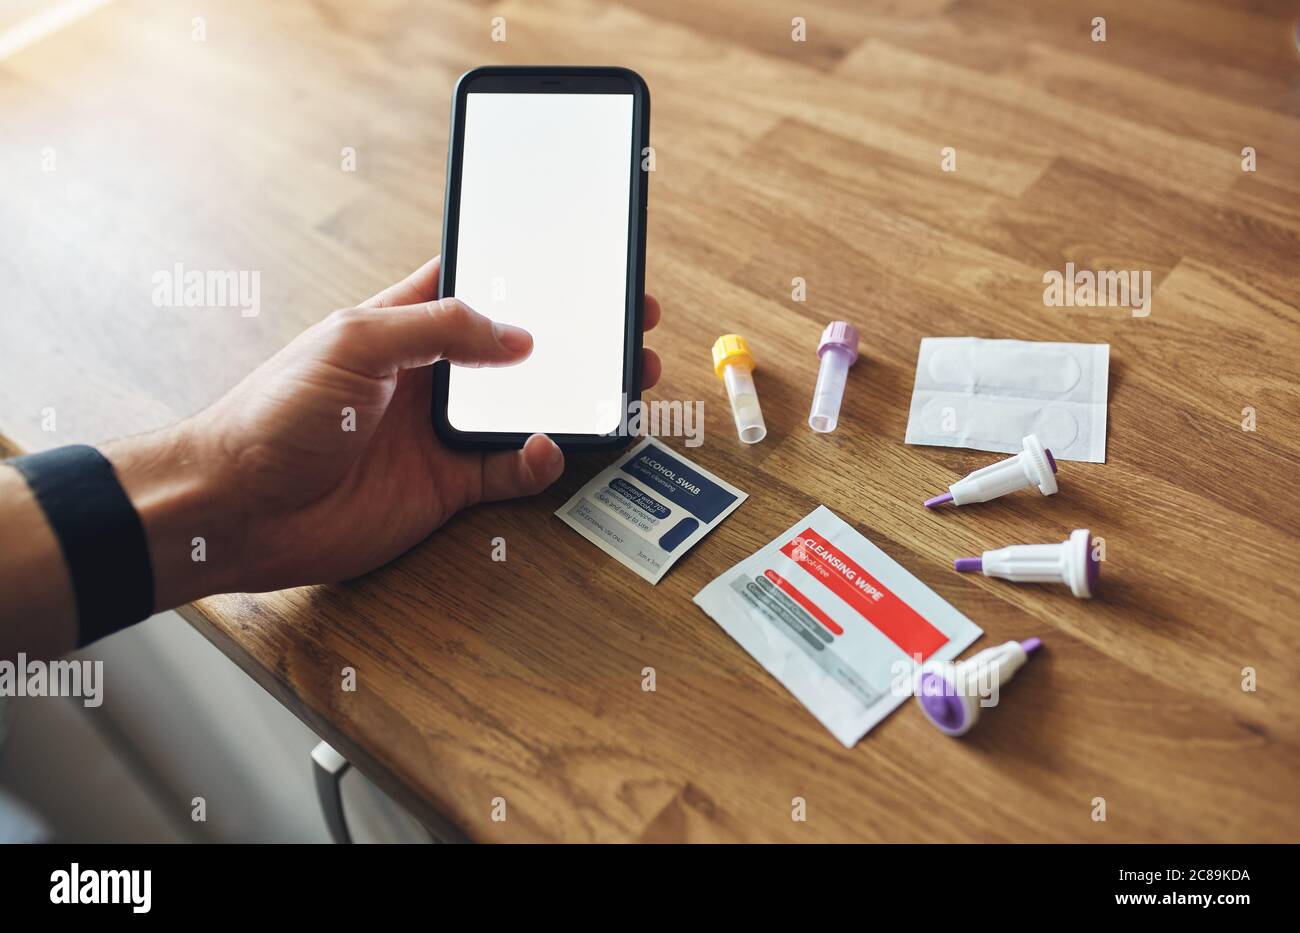 Home blood test kit with blank phone screen on wooden table in mans hands. Stock Photo